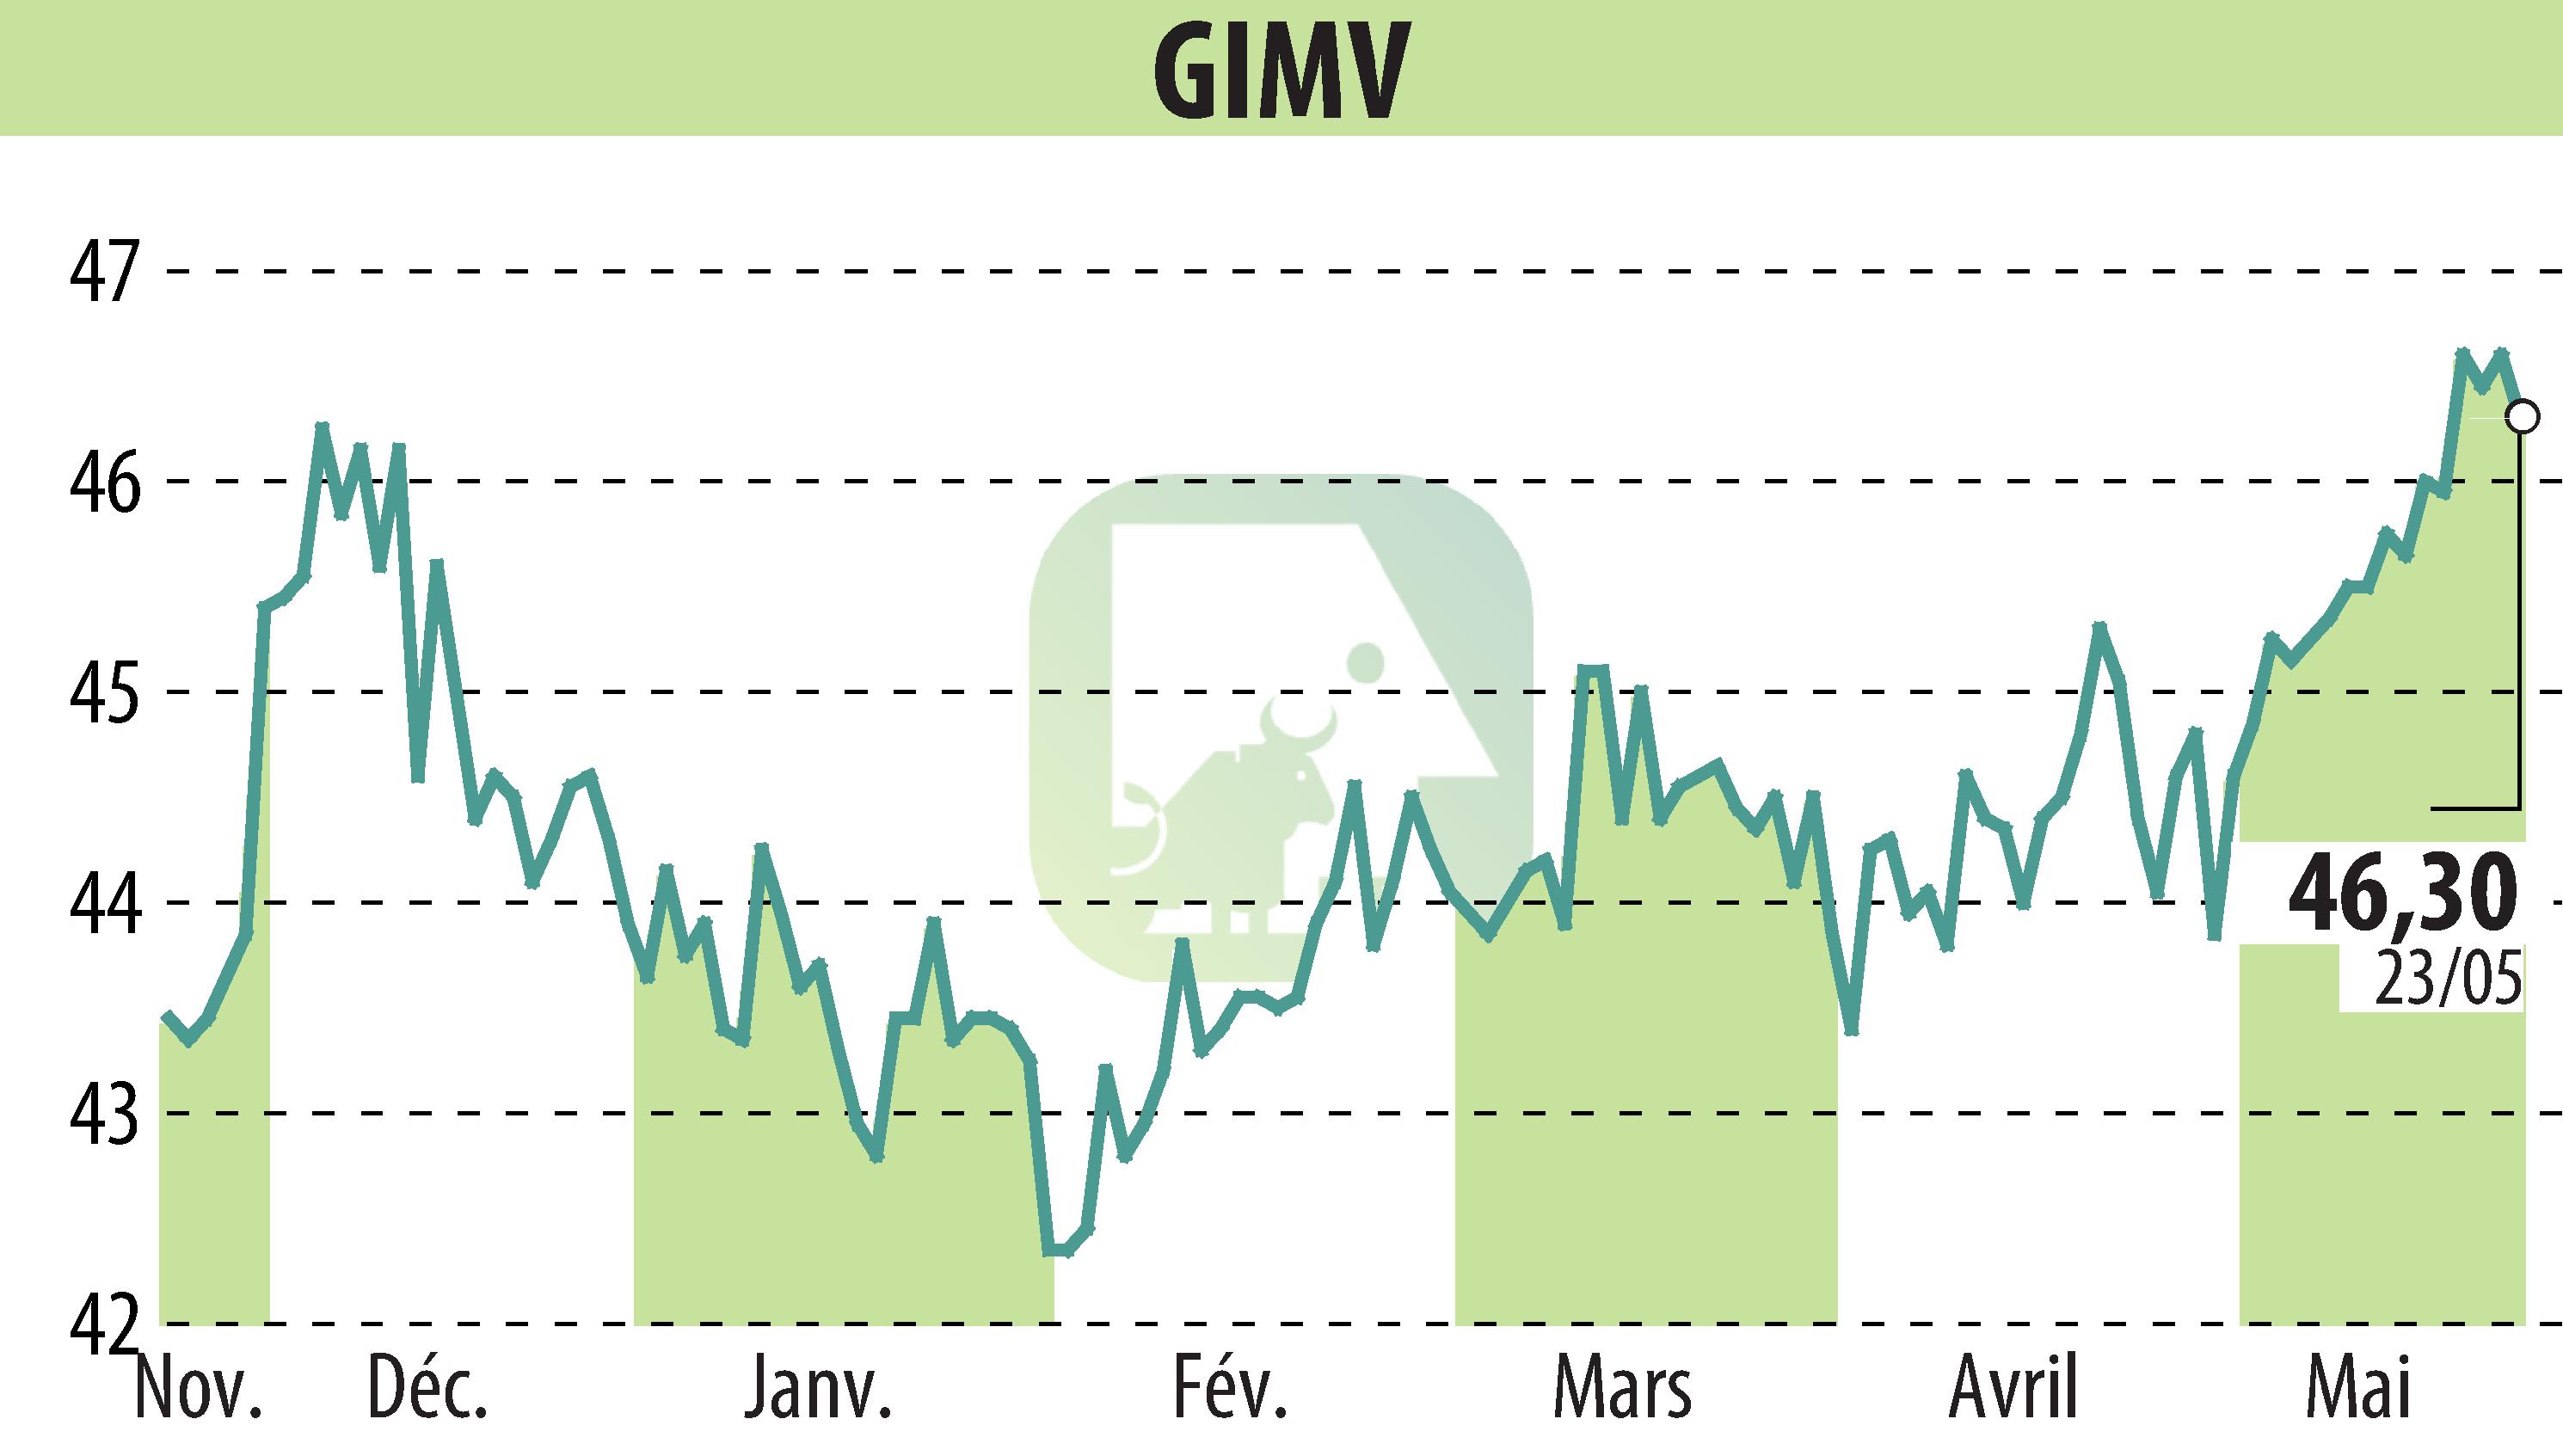 Stock price chart of Gimv (EBR:GIMB) showing fluctuations.